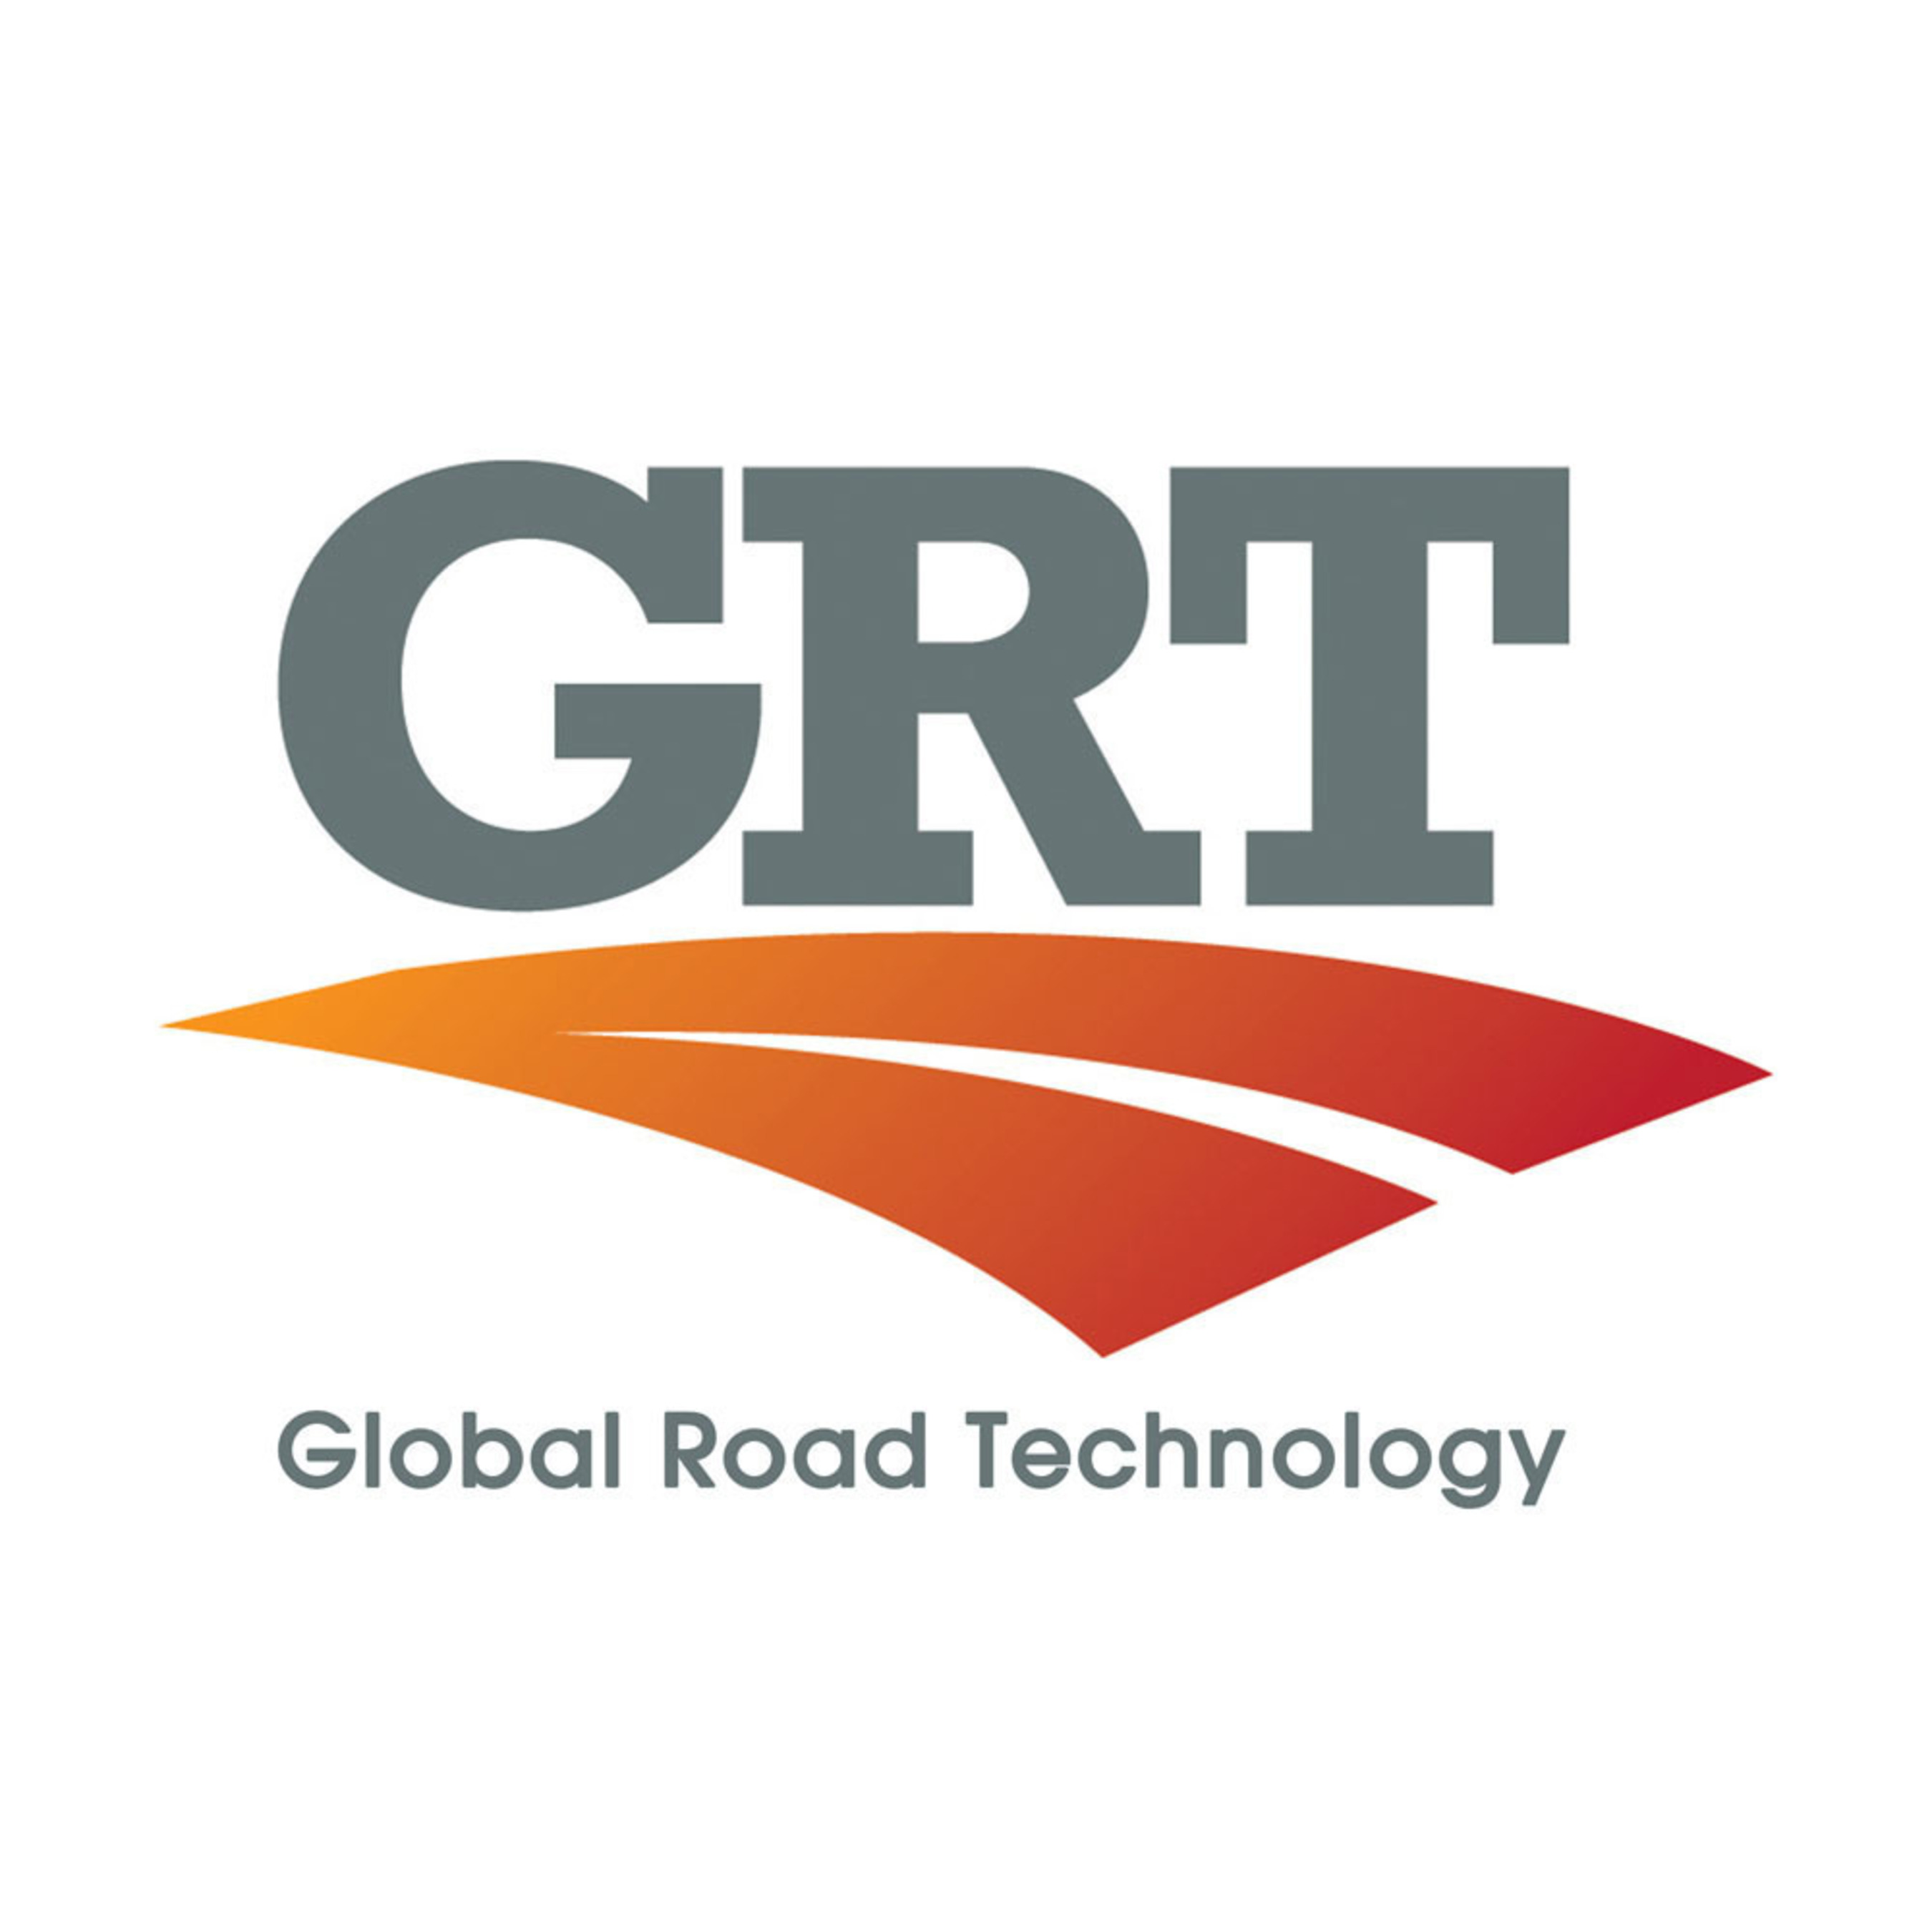 Global Road Technology Dust Control and Soil Stabilization. (PRNewsFoto/Global Road Technology) (PRNewsFoto/GLOBAL ROAD TECHNOLOGY)